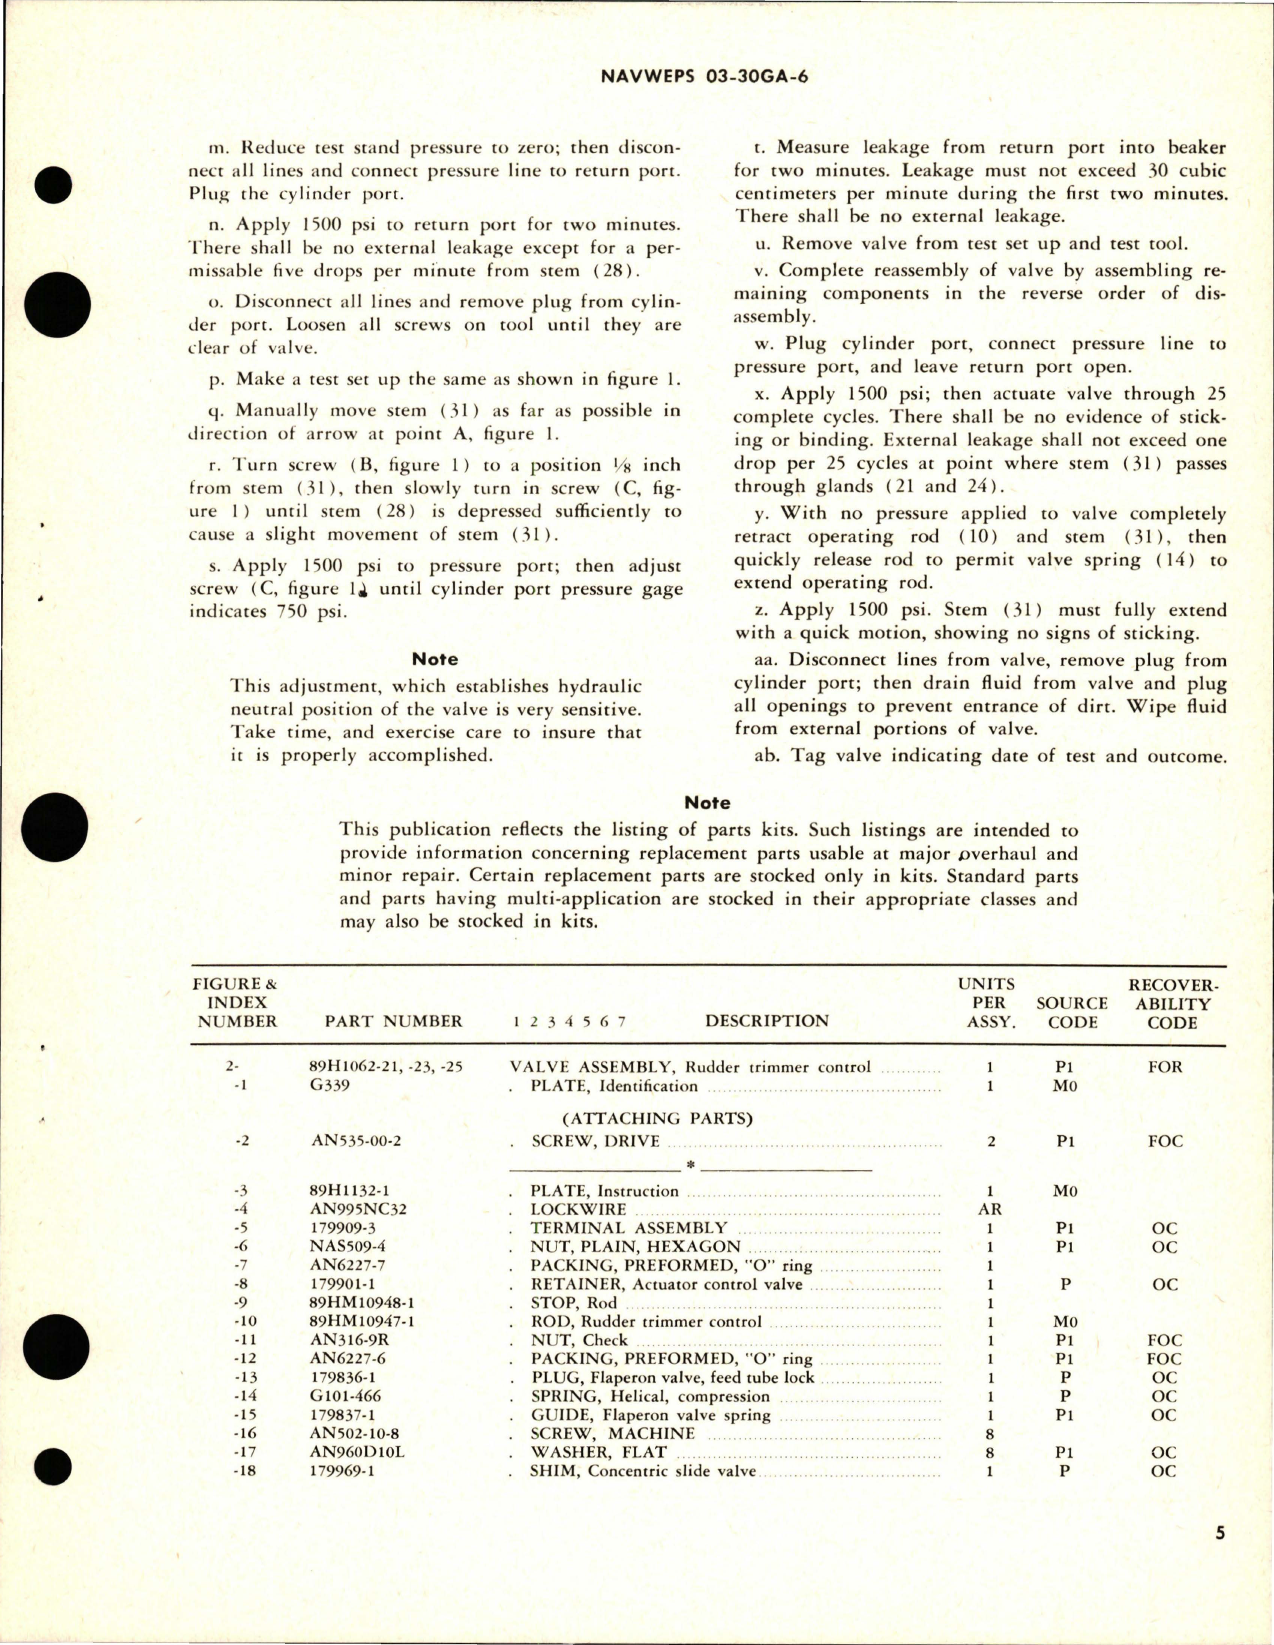 Sample page 5 from AirCorps Library document: Overhaul Instructions with Parts Breakdown for Hydraulic Rudder Trimmer Control Valve - 89H1062-21, 89H1062-23, and 89H1062-25